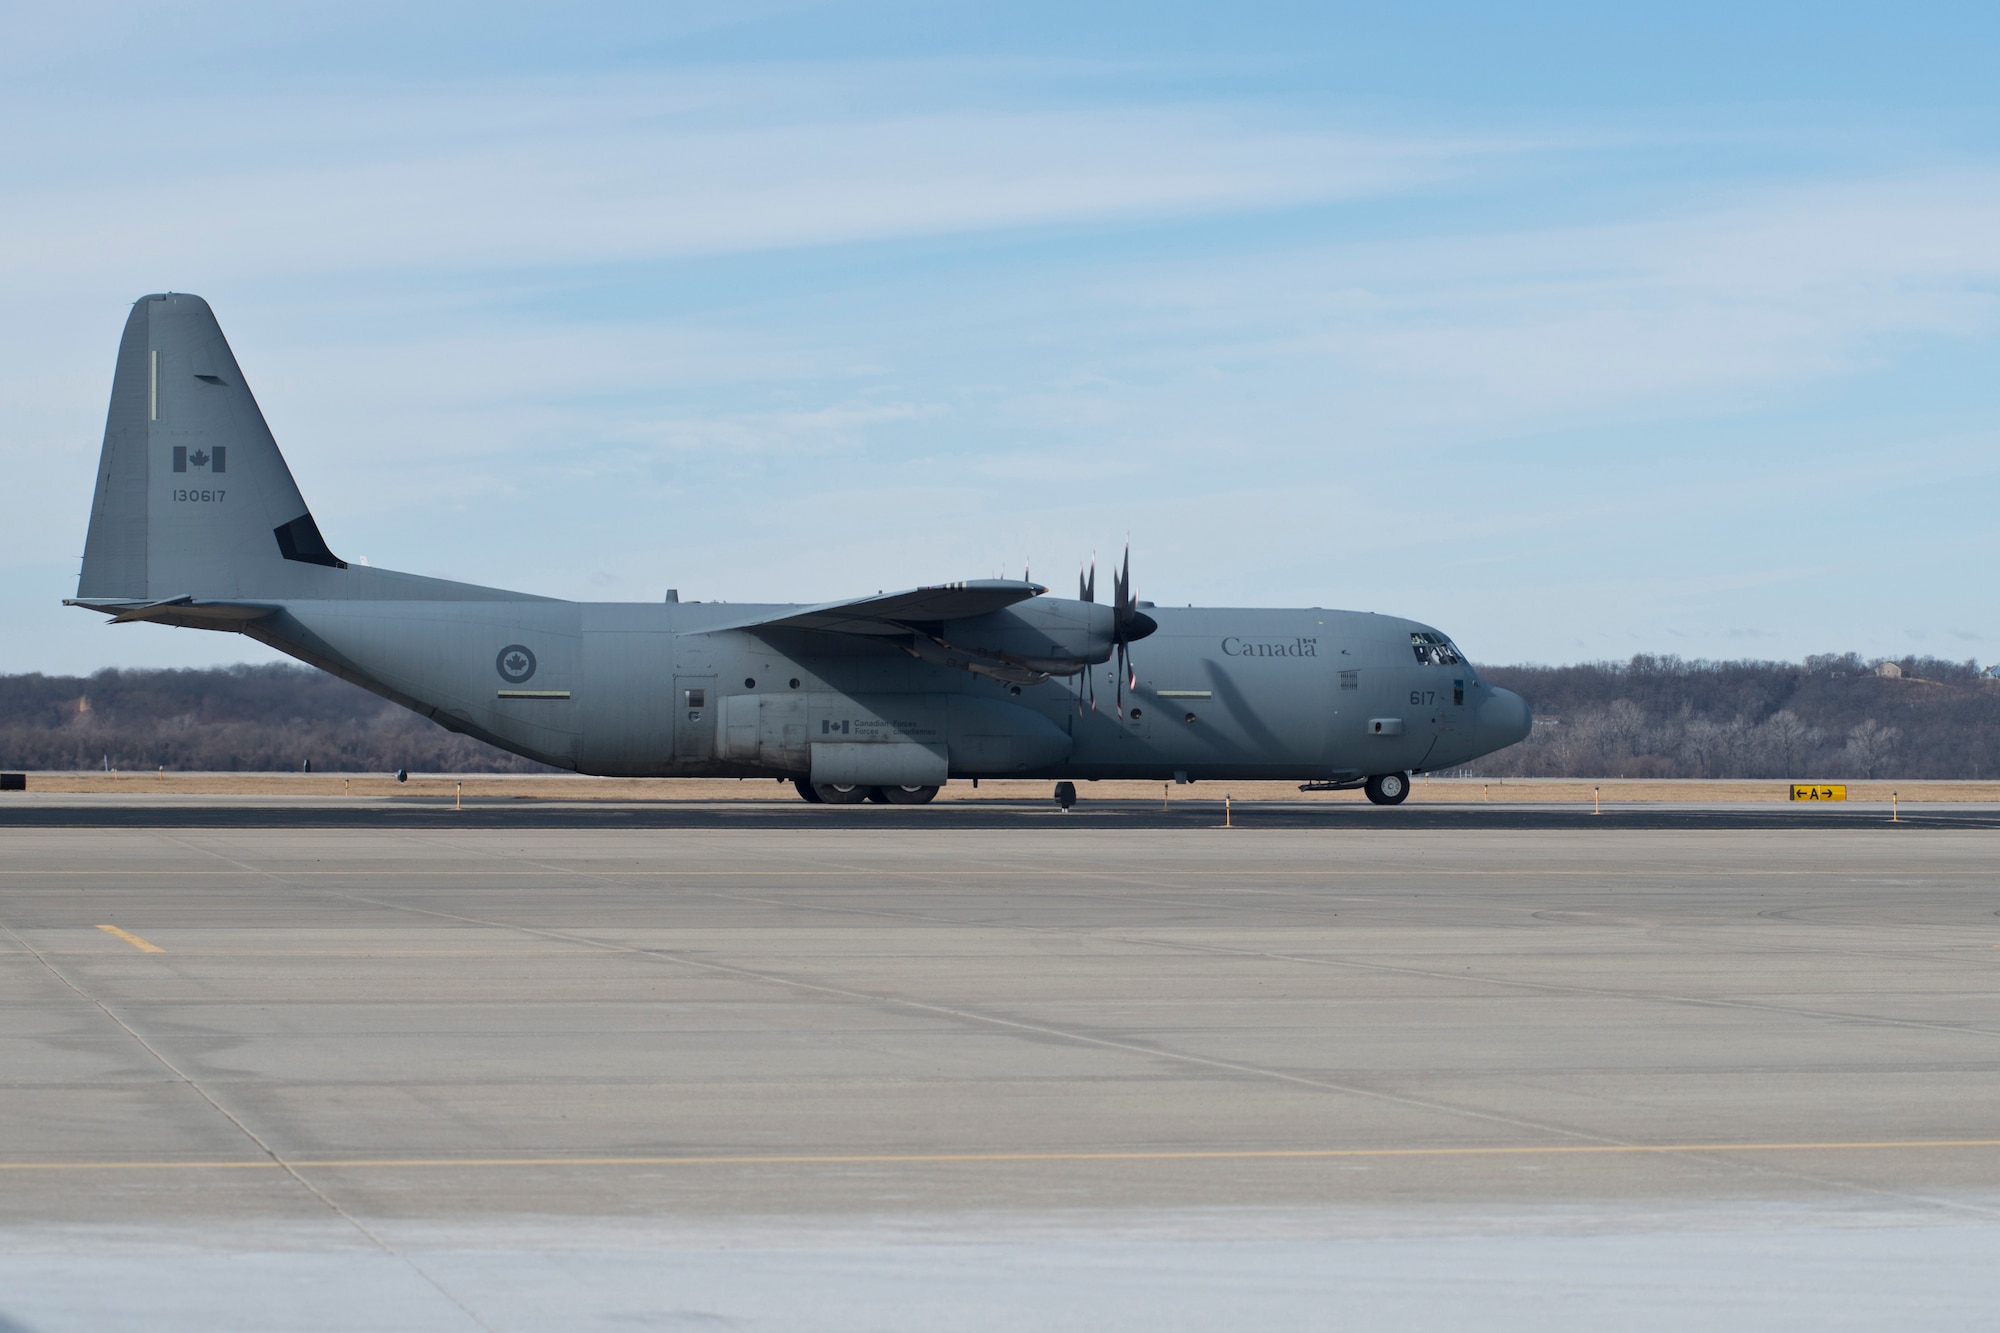 A Royal Canadian Air Force CC-130J aircraft taxies at Rosecrans Memorial Airport, St. Joesph, Mo. February 1, 2018 after a training flight for the Treaty on Open Skies. Personnel from the United States, Canada, United Kingdom, France and the Czech Republic participated in the flight designed to promote international cooperation and transparency. (U.S. Air National Guard photo/Tech. Sgt. John Hillier)